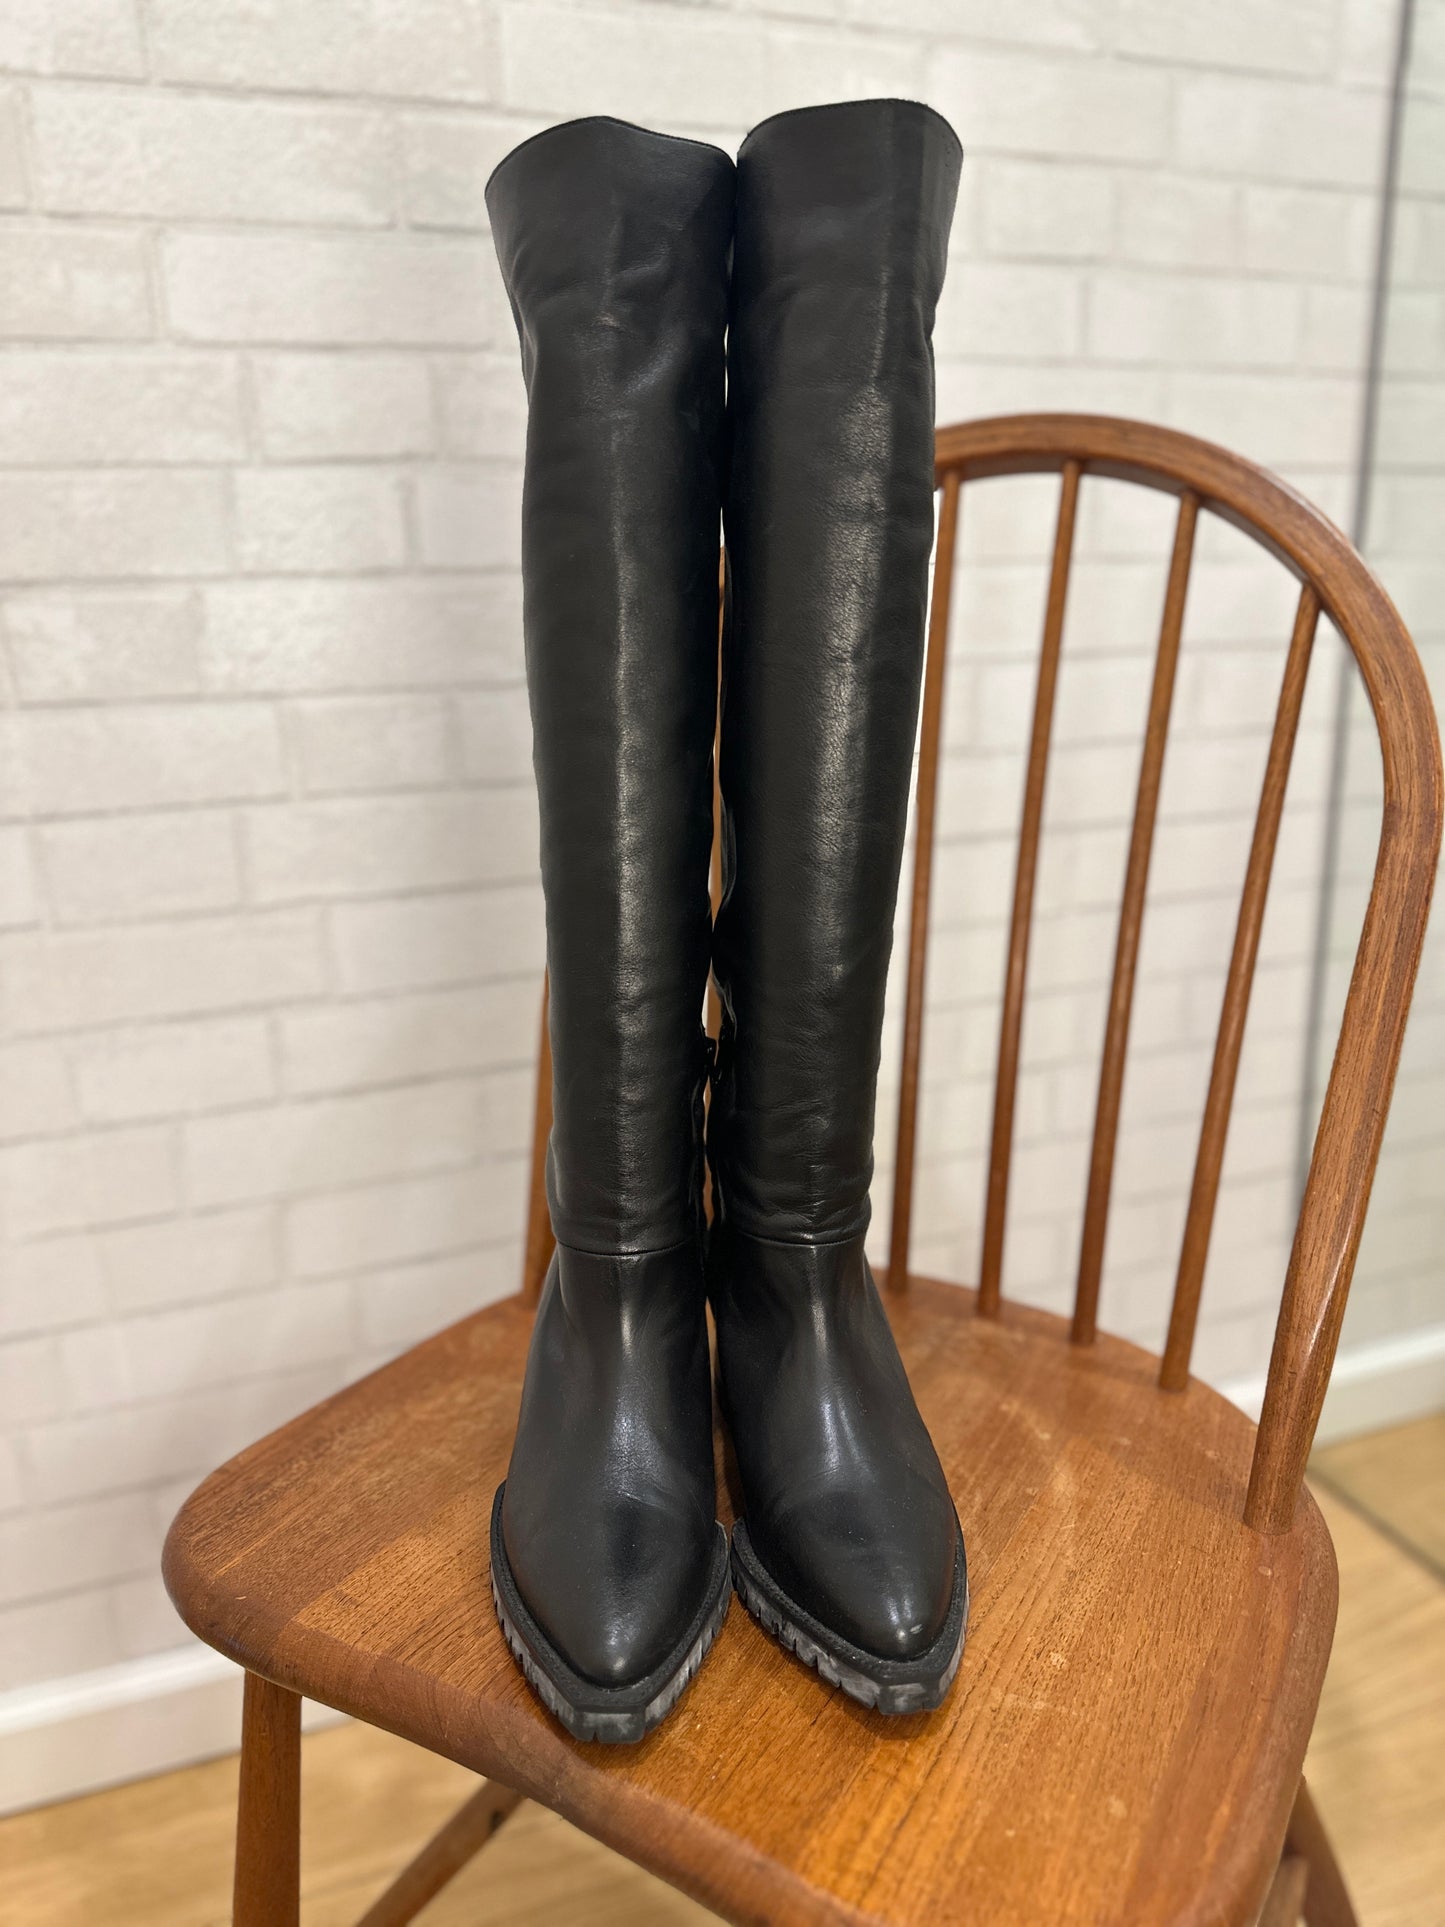 RODEBJER High Boots Size 39-US8.5